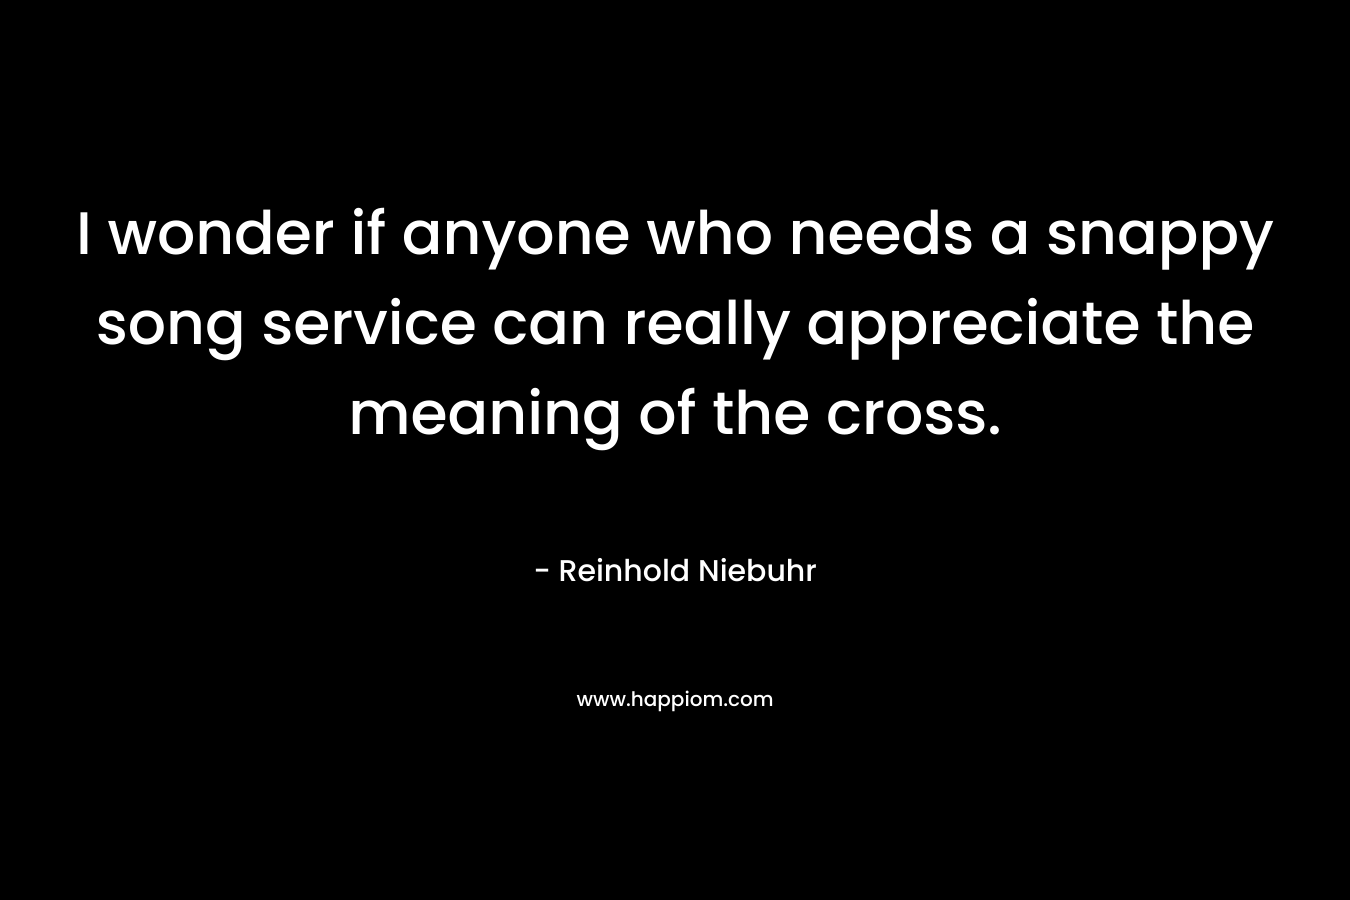 I wonder if anyone who needs a snappy song service can really appreciate the meaning of the cross. – Reinhold Niebuhr